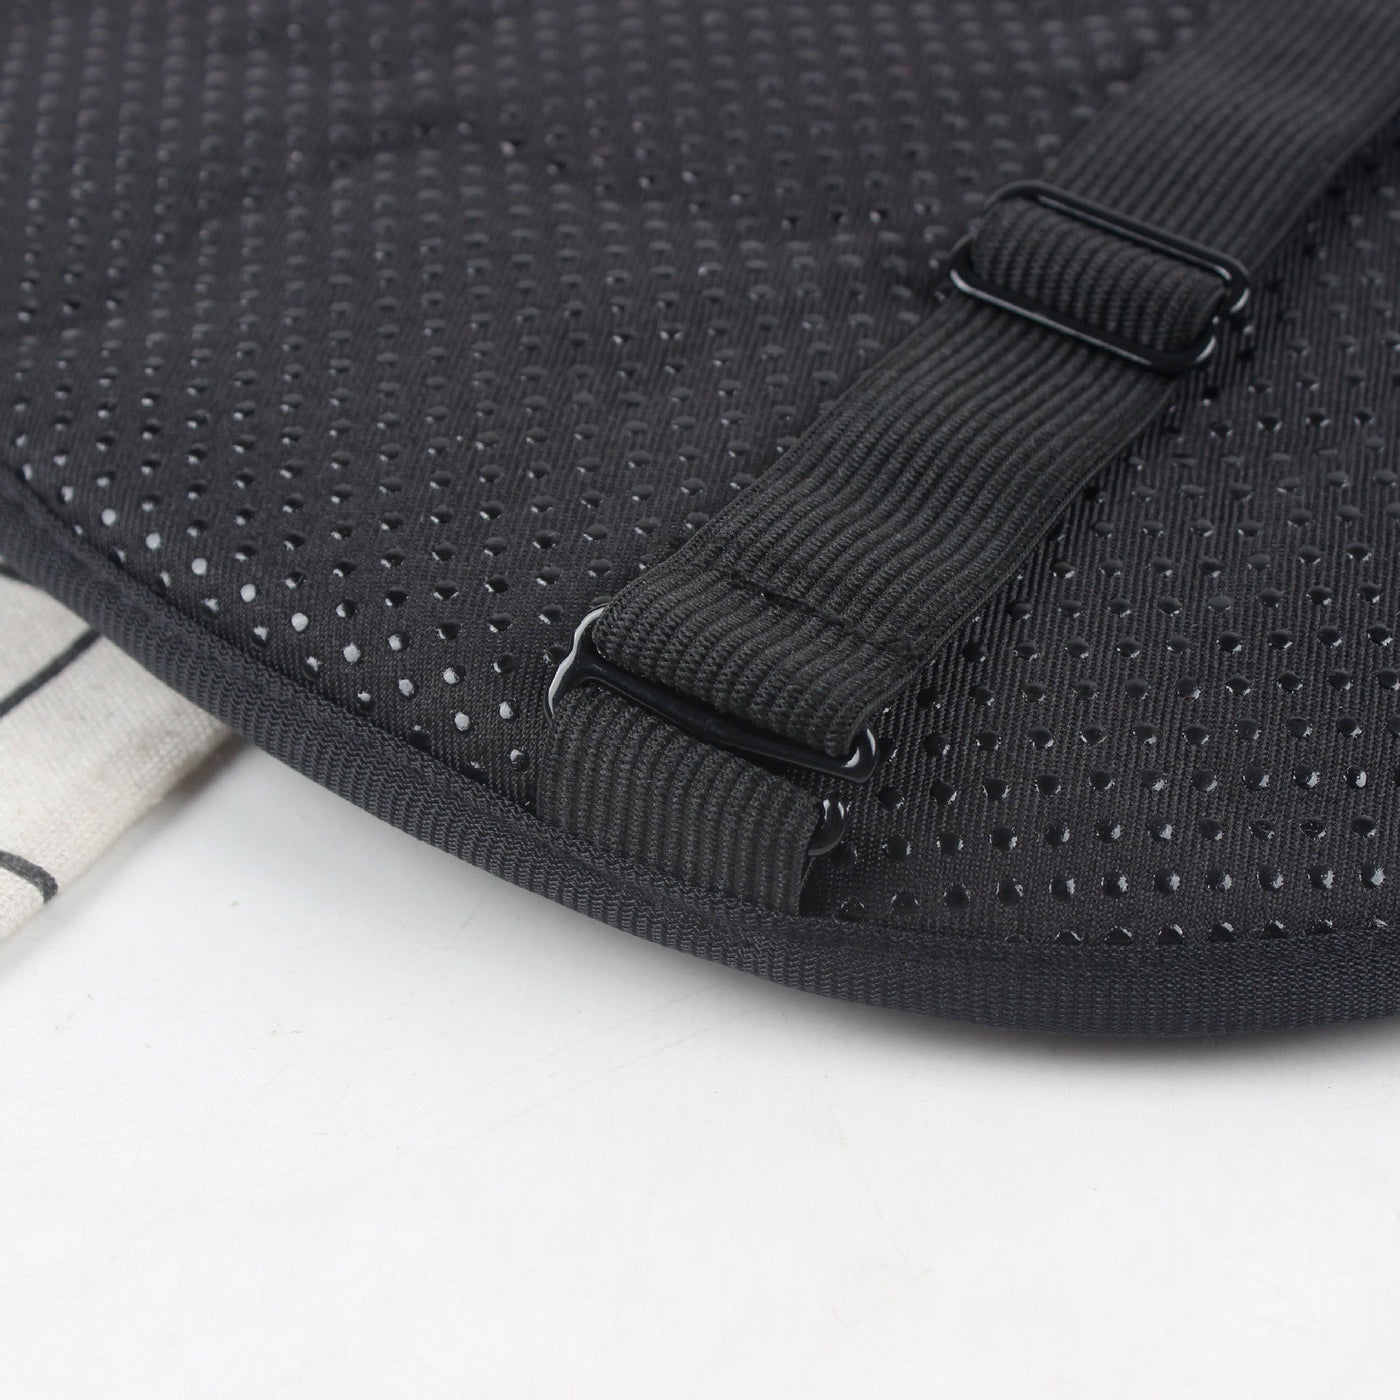 A black mesh bag with a strap on it designed for shock absorption, the Motorcycle Seat Cushion Pad.